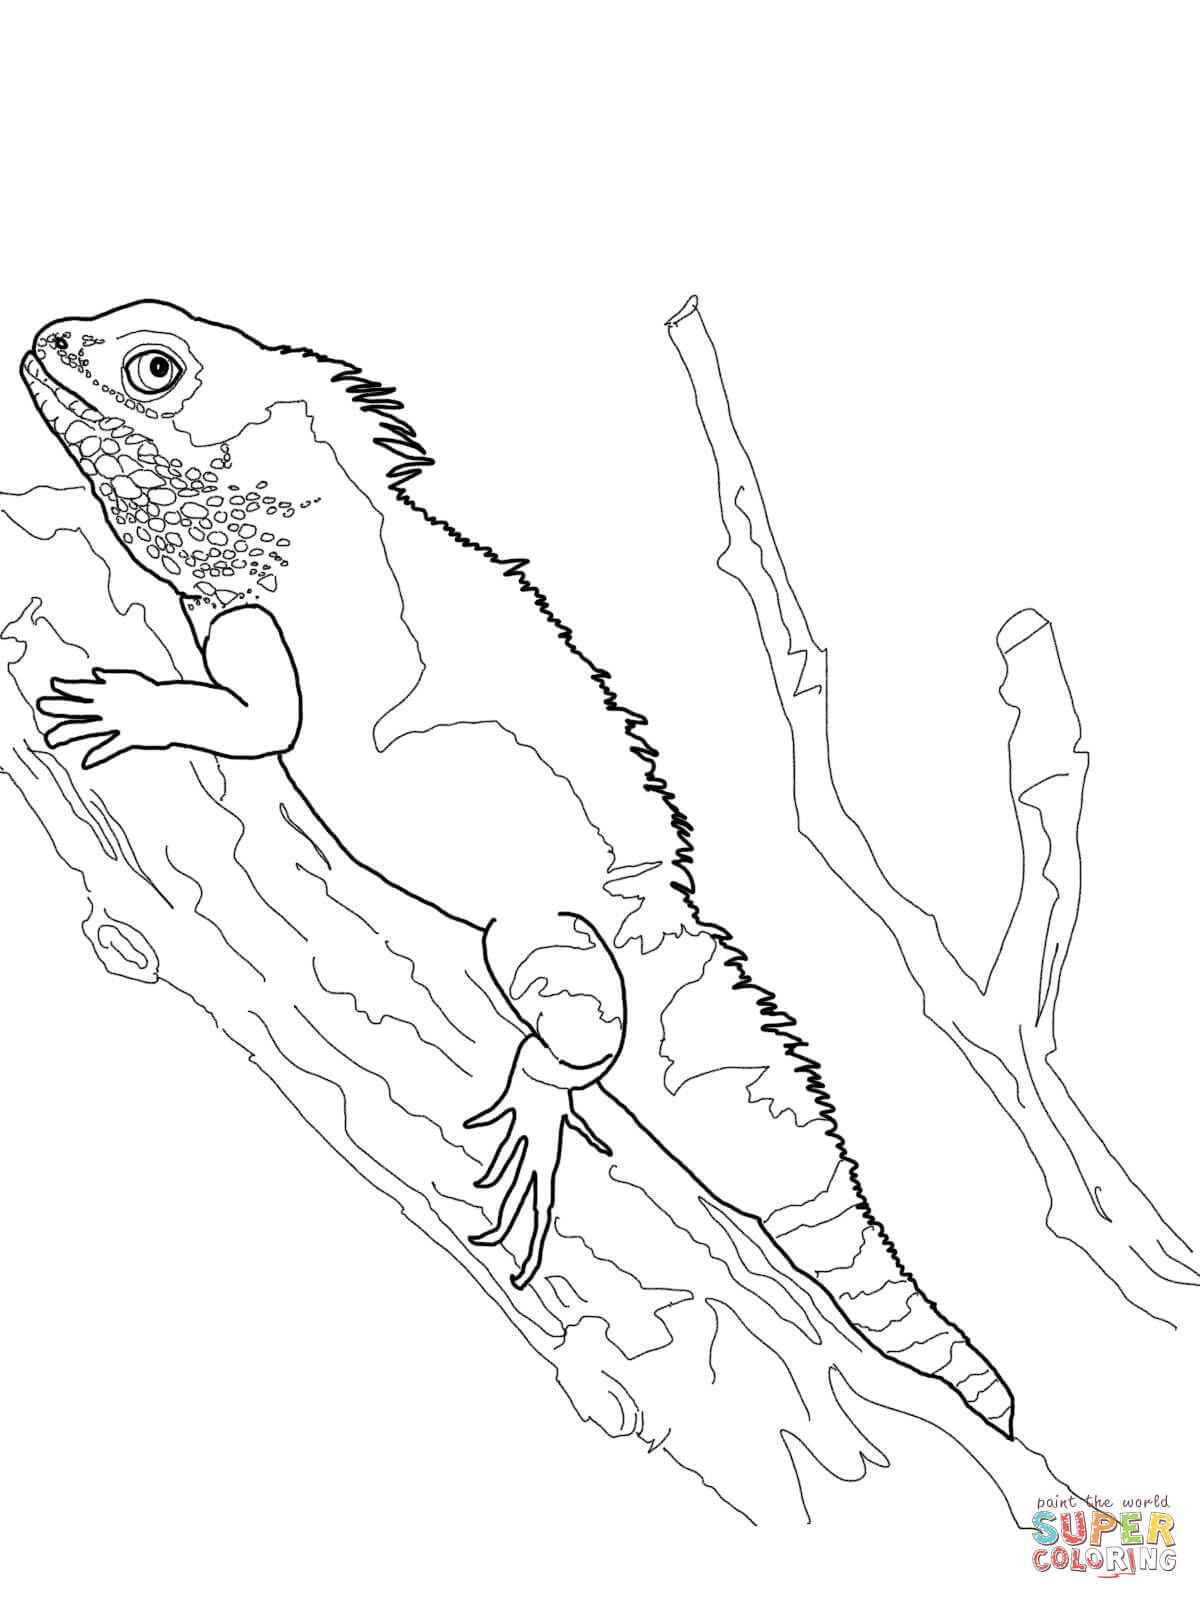 356 Unicorn Bearded Dragon Coloring Page for Adult